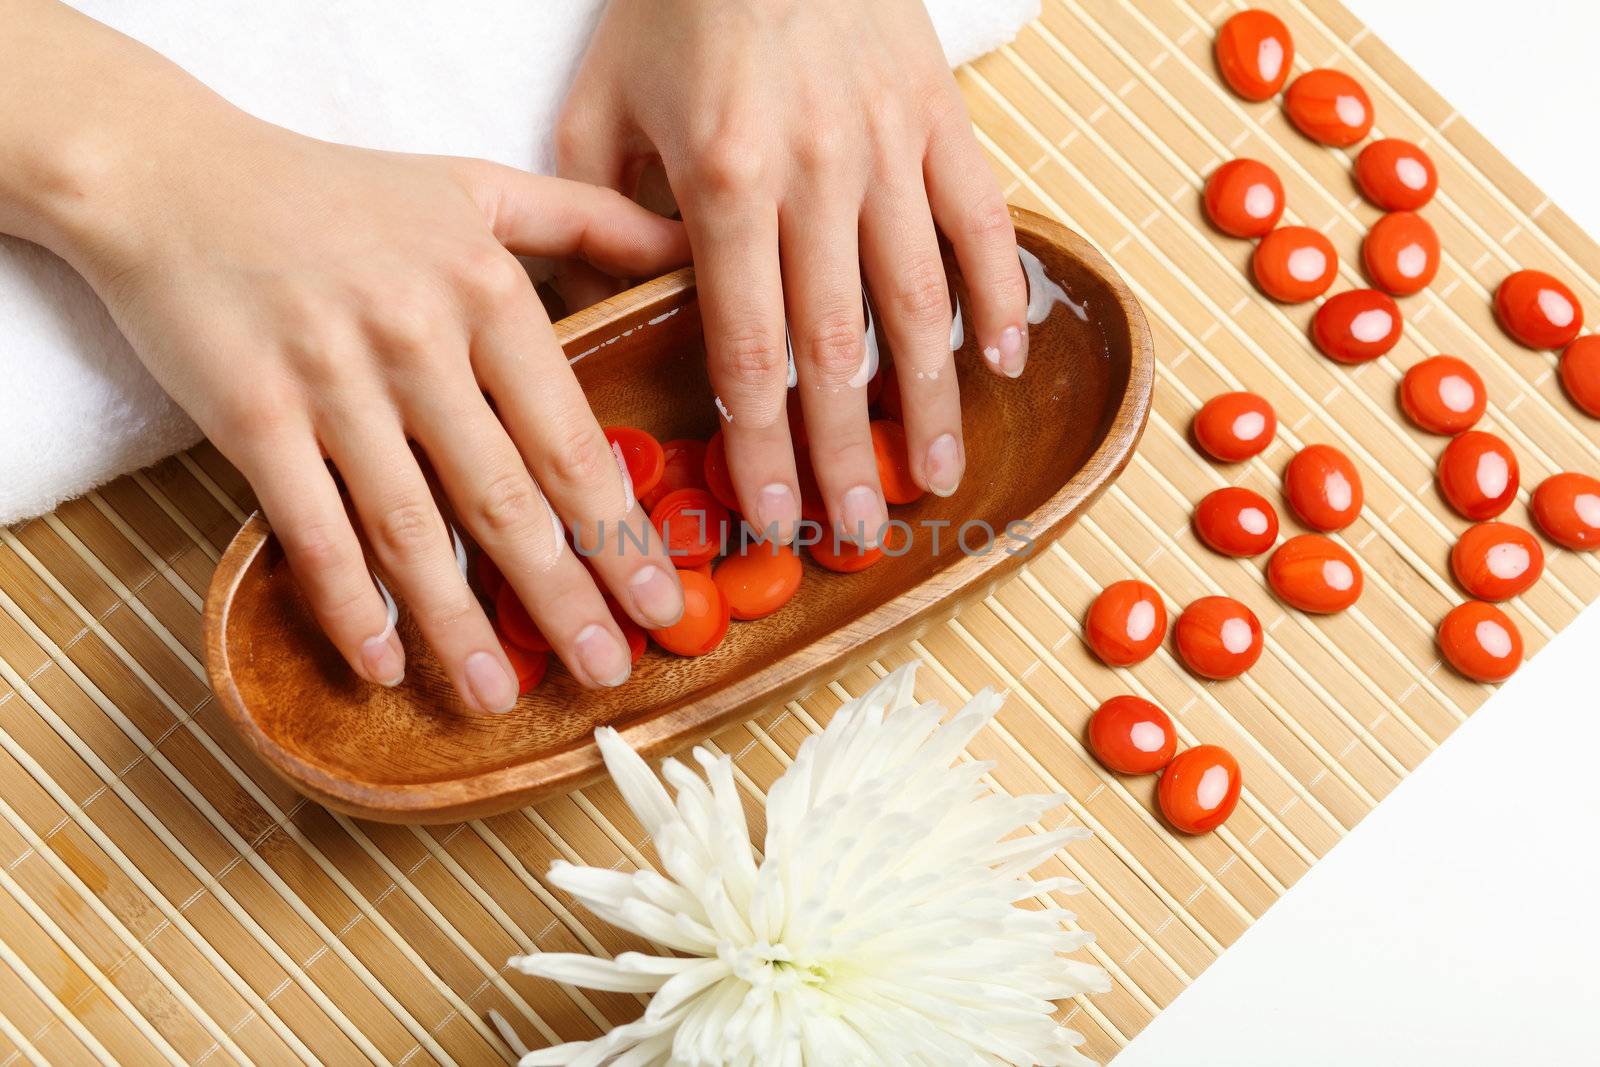 Young woman is getting manicure in a beauty salon